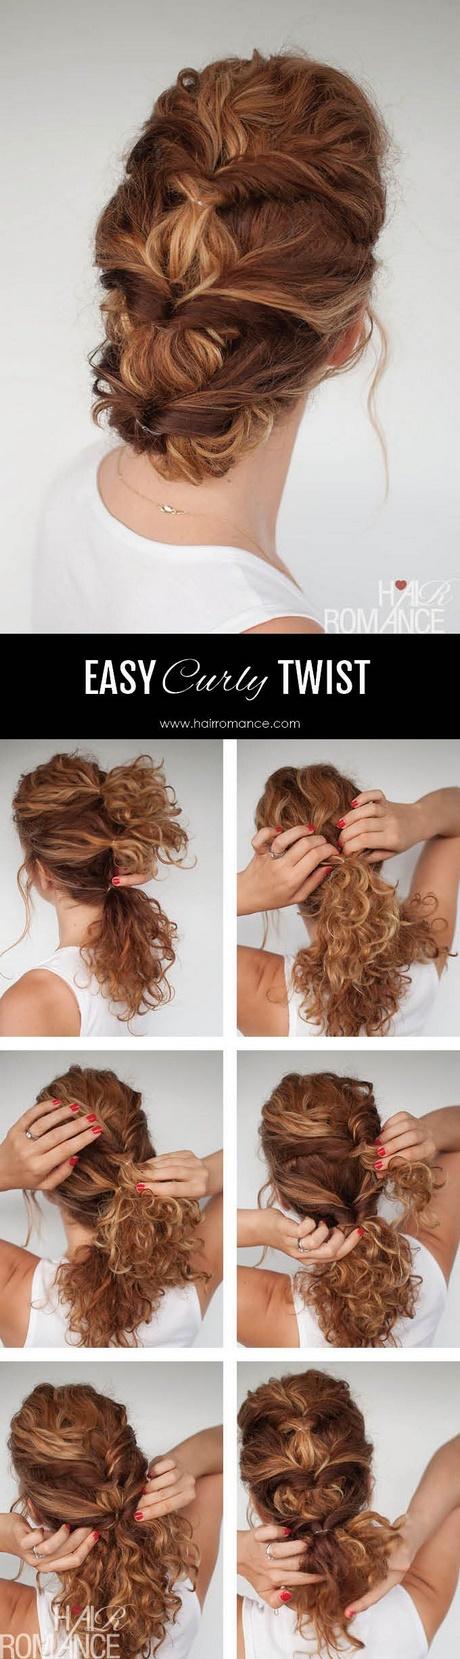 Cute everyday hairstyles for curly hair cute-everyday-hairstyles-for-curly-hair-74_4